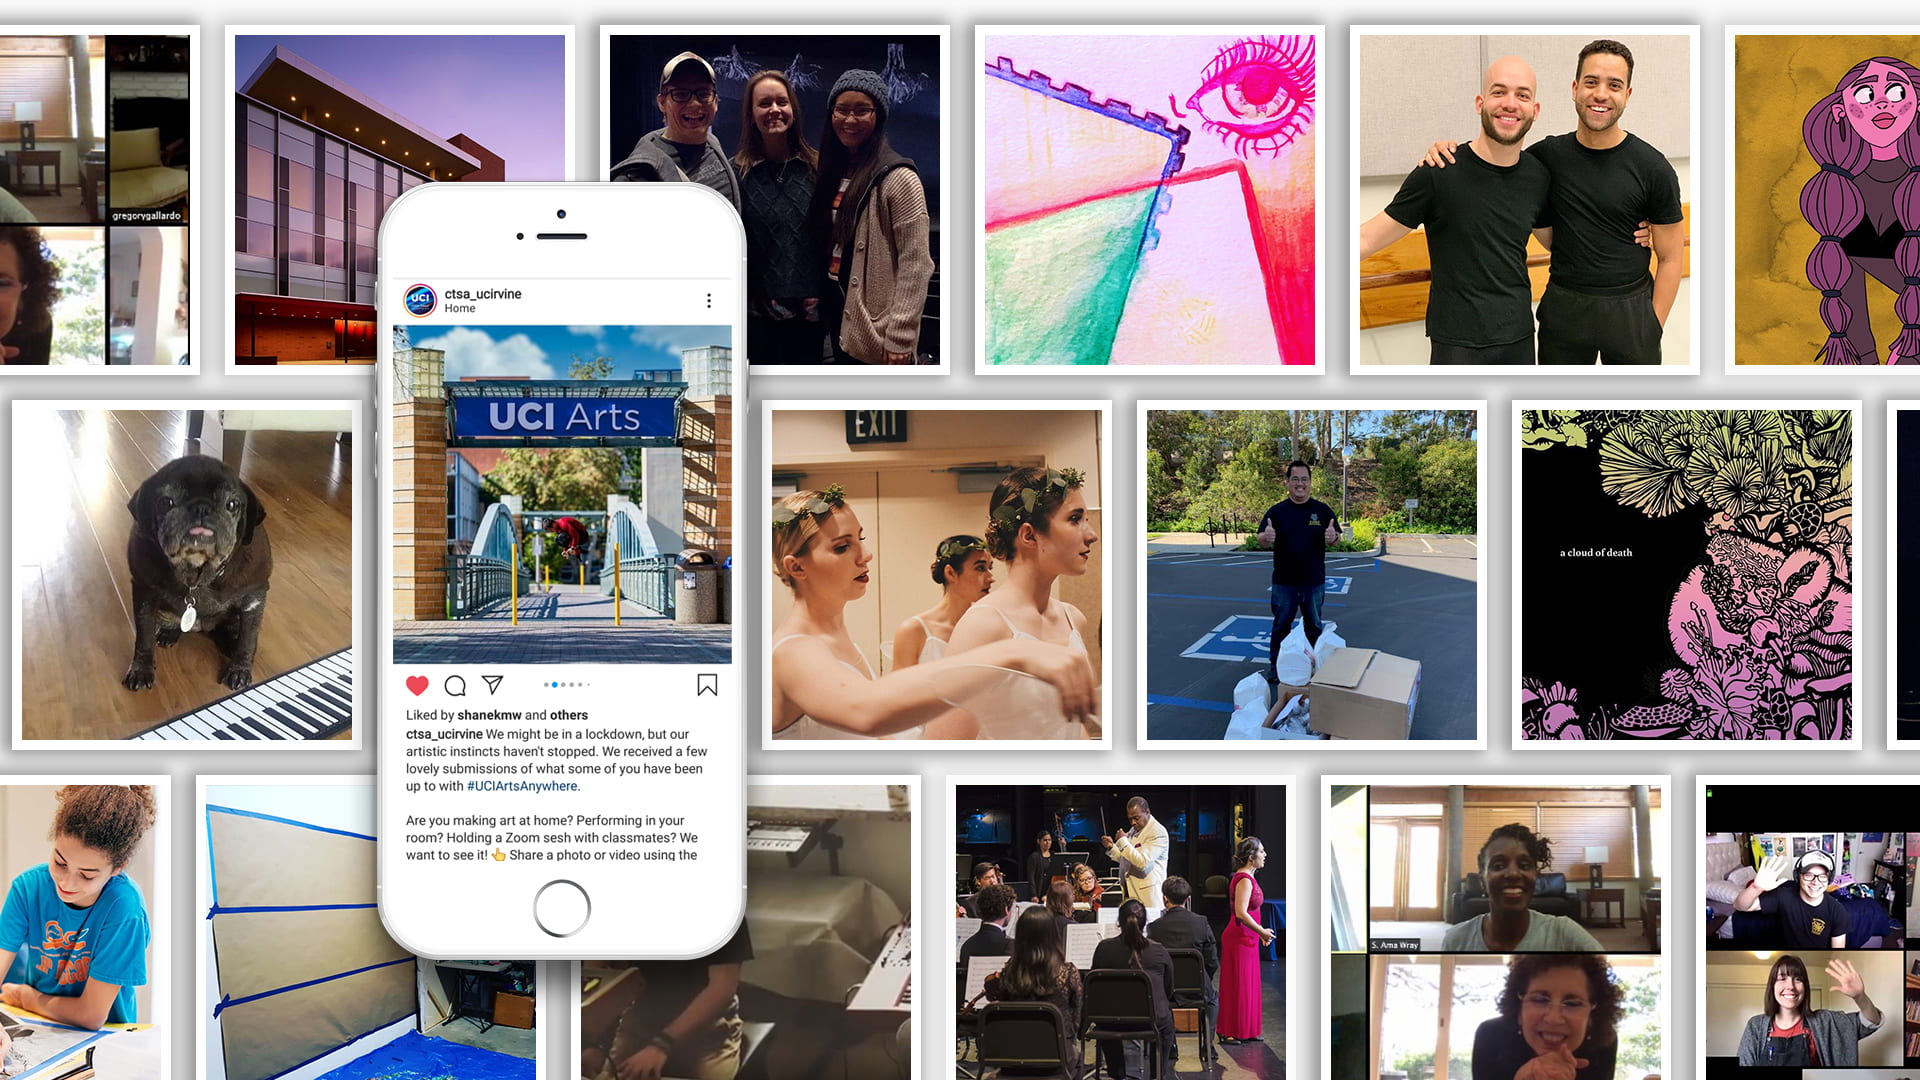 The Claire Trevor School of the Arts’ #UCIArtsAnywhere project encourages people to post photos or videos of themselves engaging with the arts on Instagram, Facebook and Twitter.